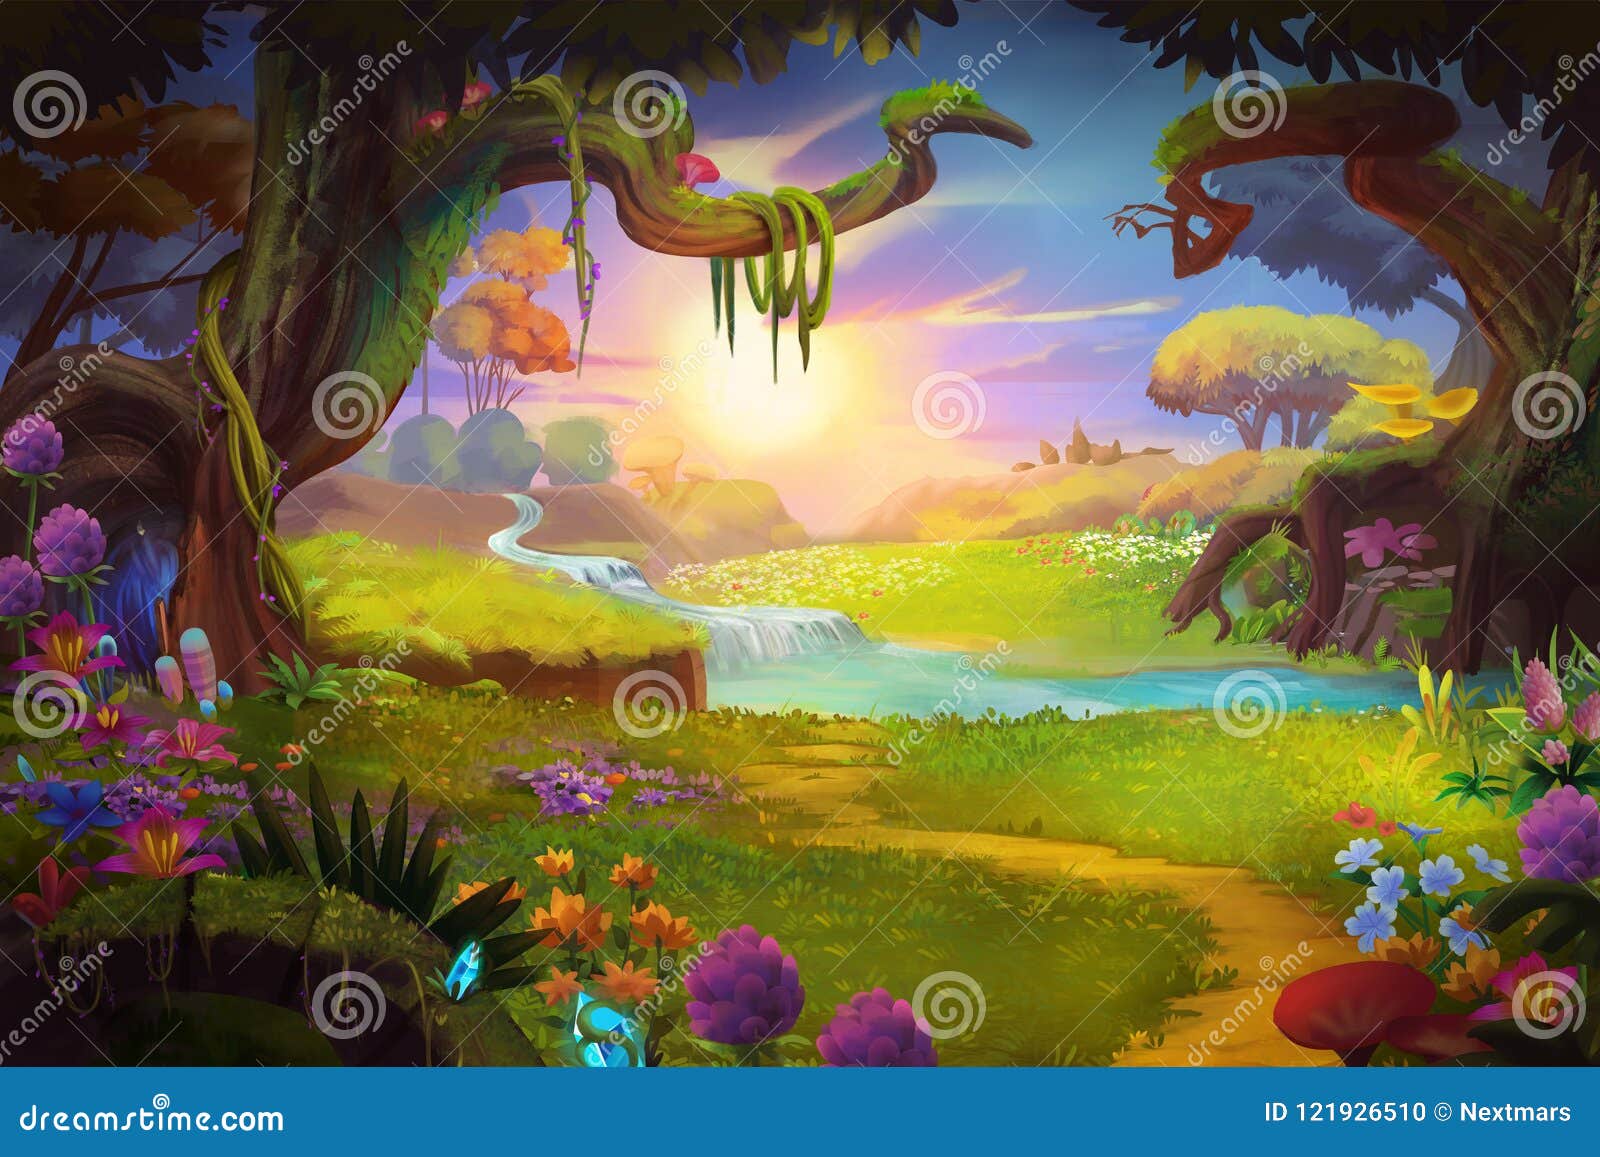 fantasy land, grass and hill, river and tree with fantastic, realistic style